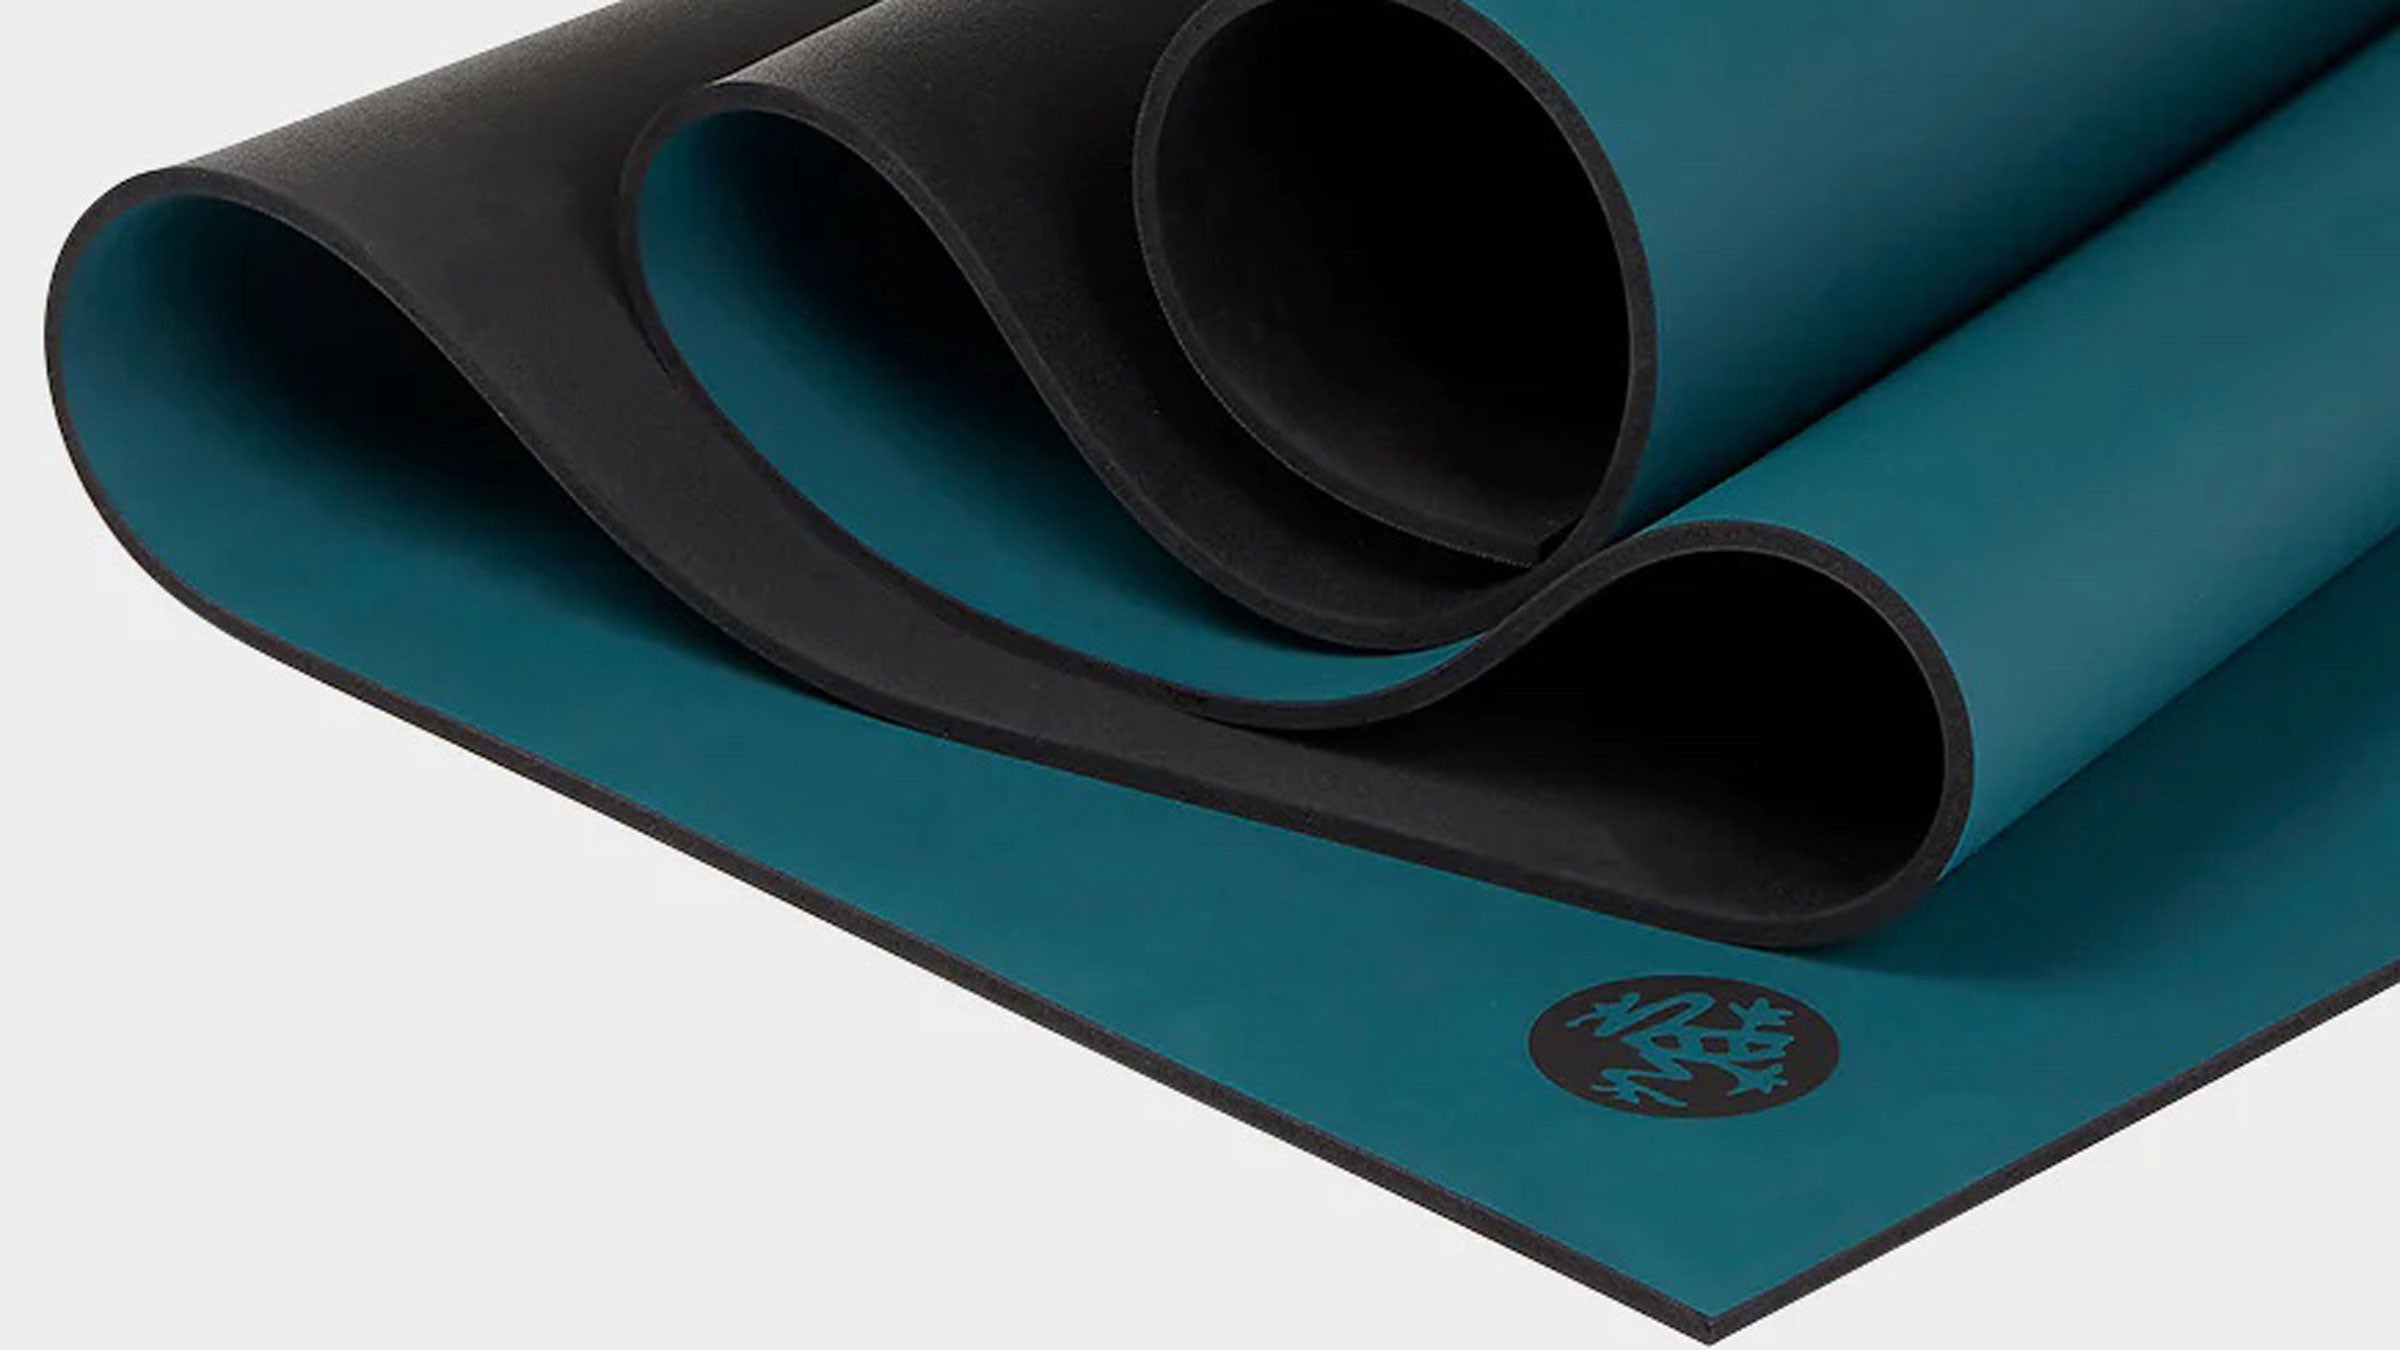 18 Yoga gifts - What to buy the yoga lover in your life